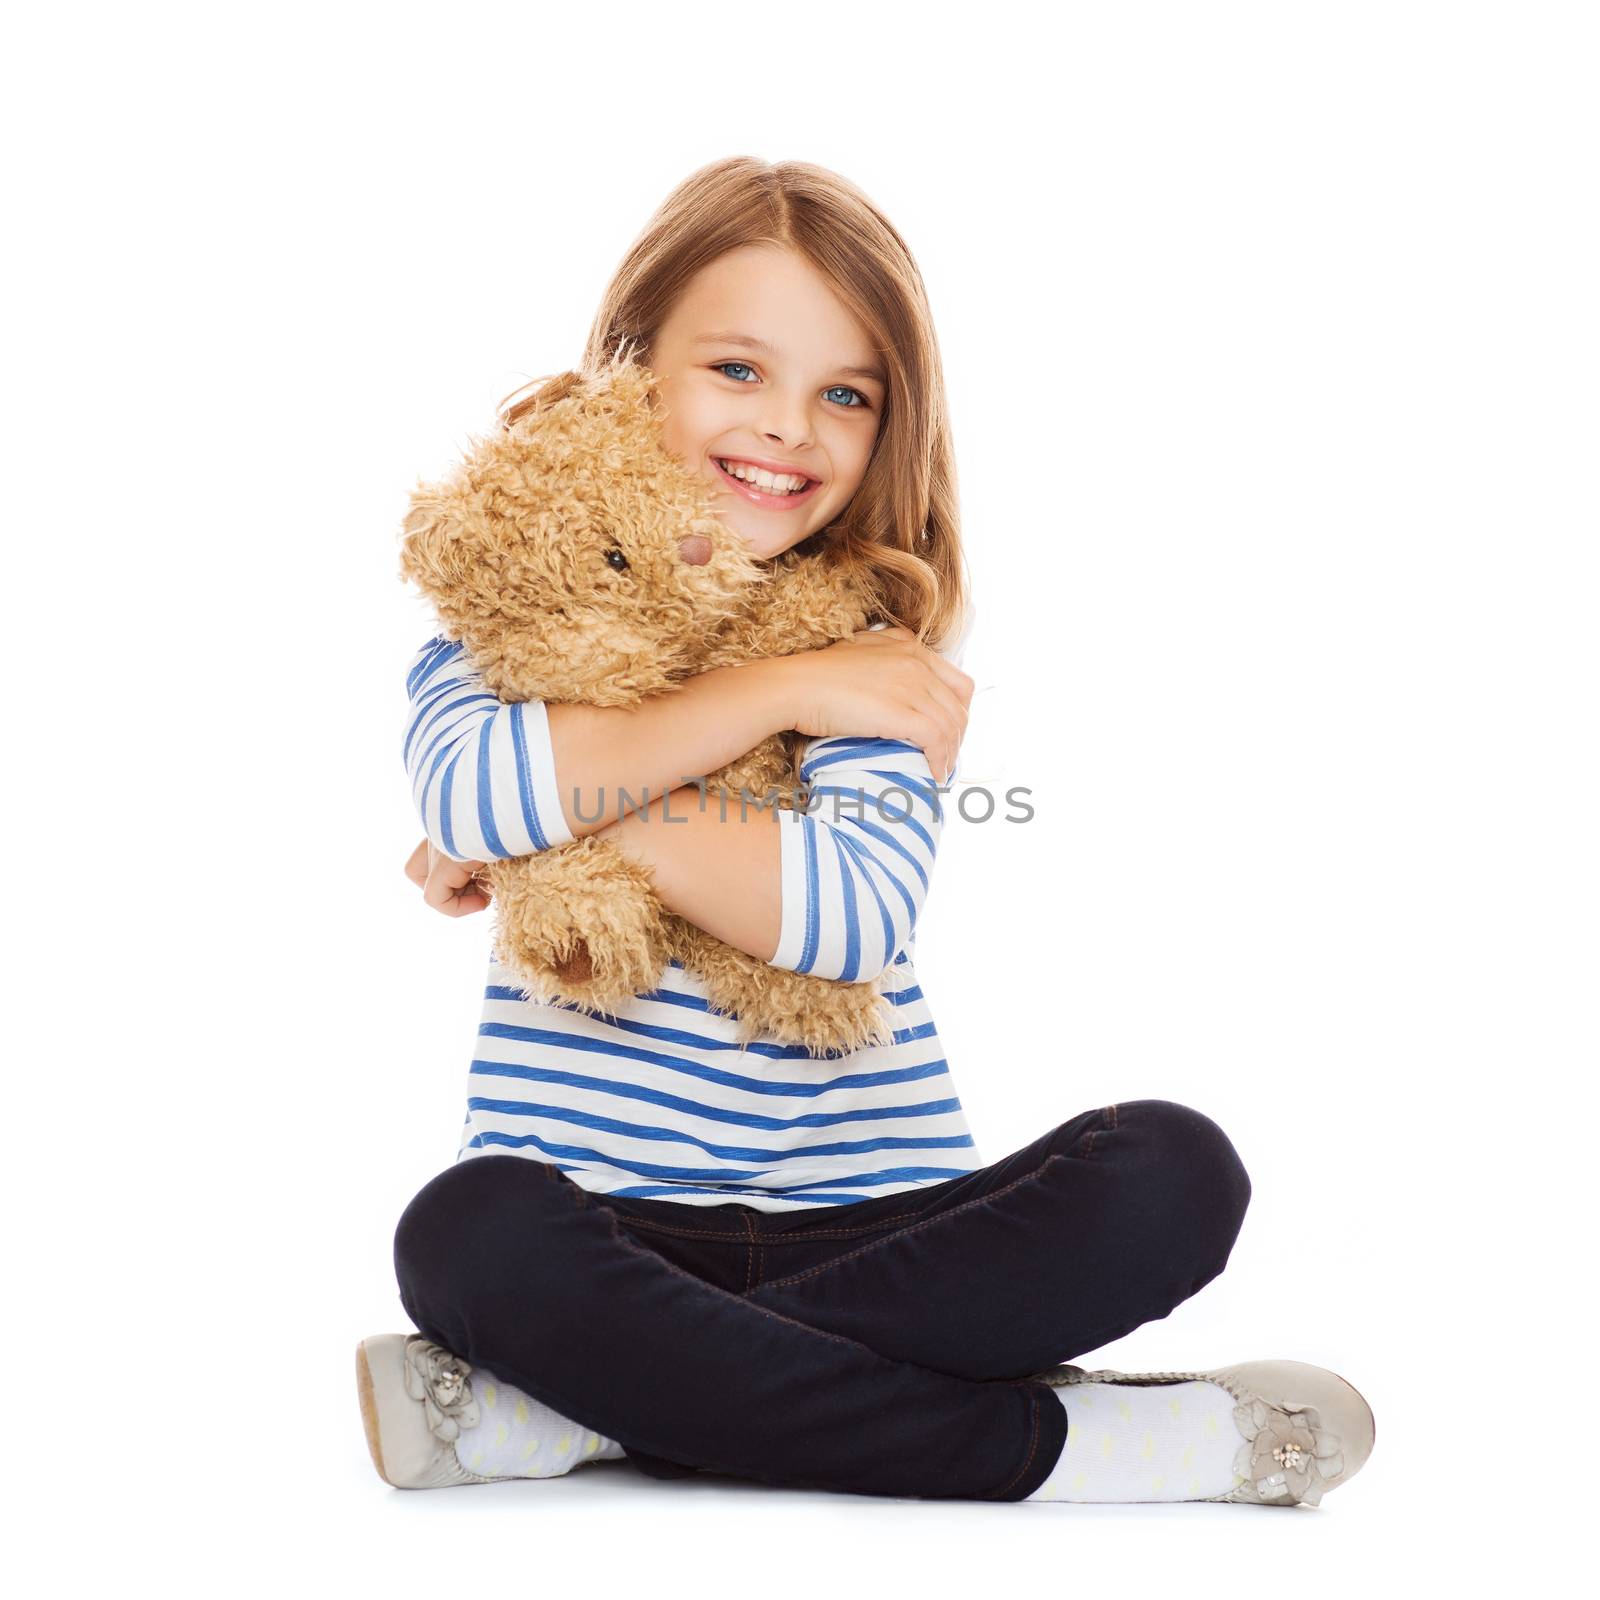 childhood, toys and shopping concept - cute little girl hugging teddy bear